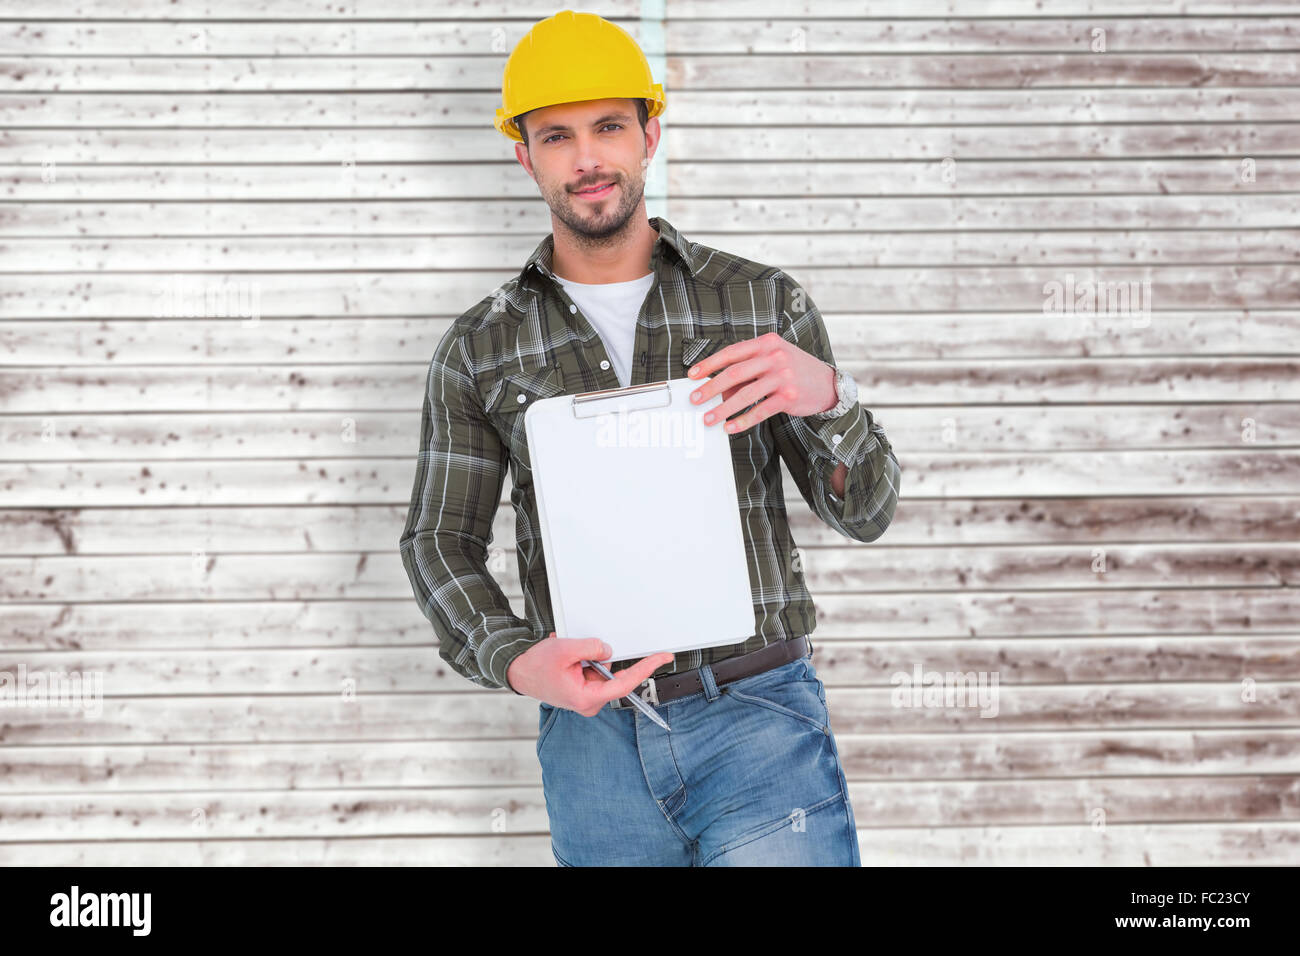 Composite image of smiling manual worker holding clipboard Stock Photo